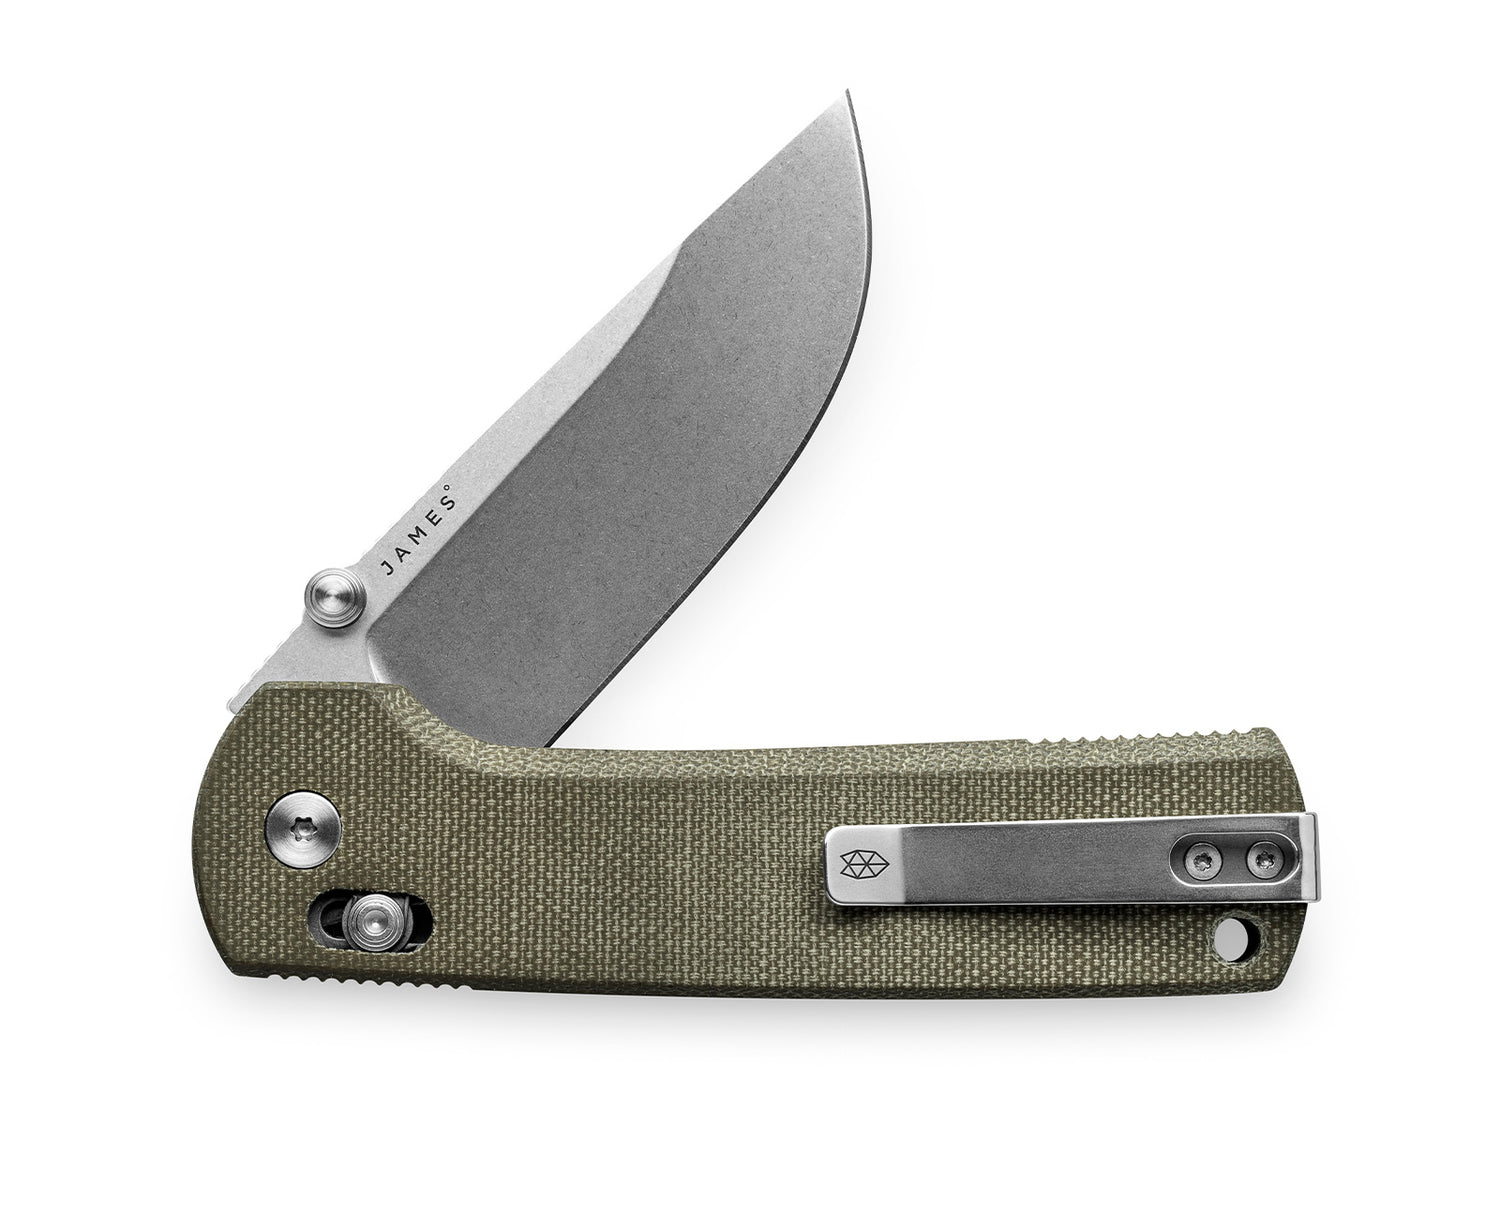 The Kline knife with OD Green micarta handle and stainless steel blade.